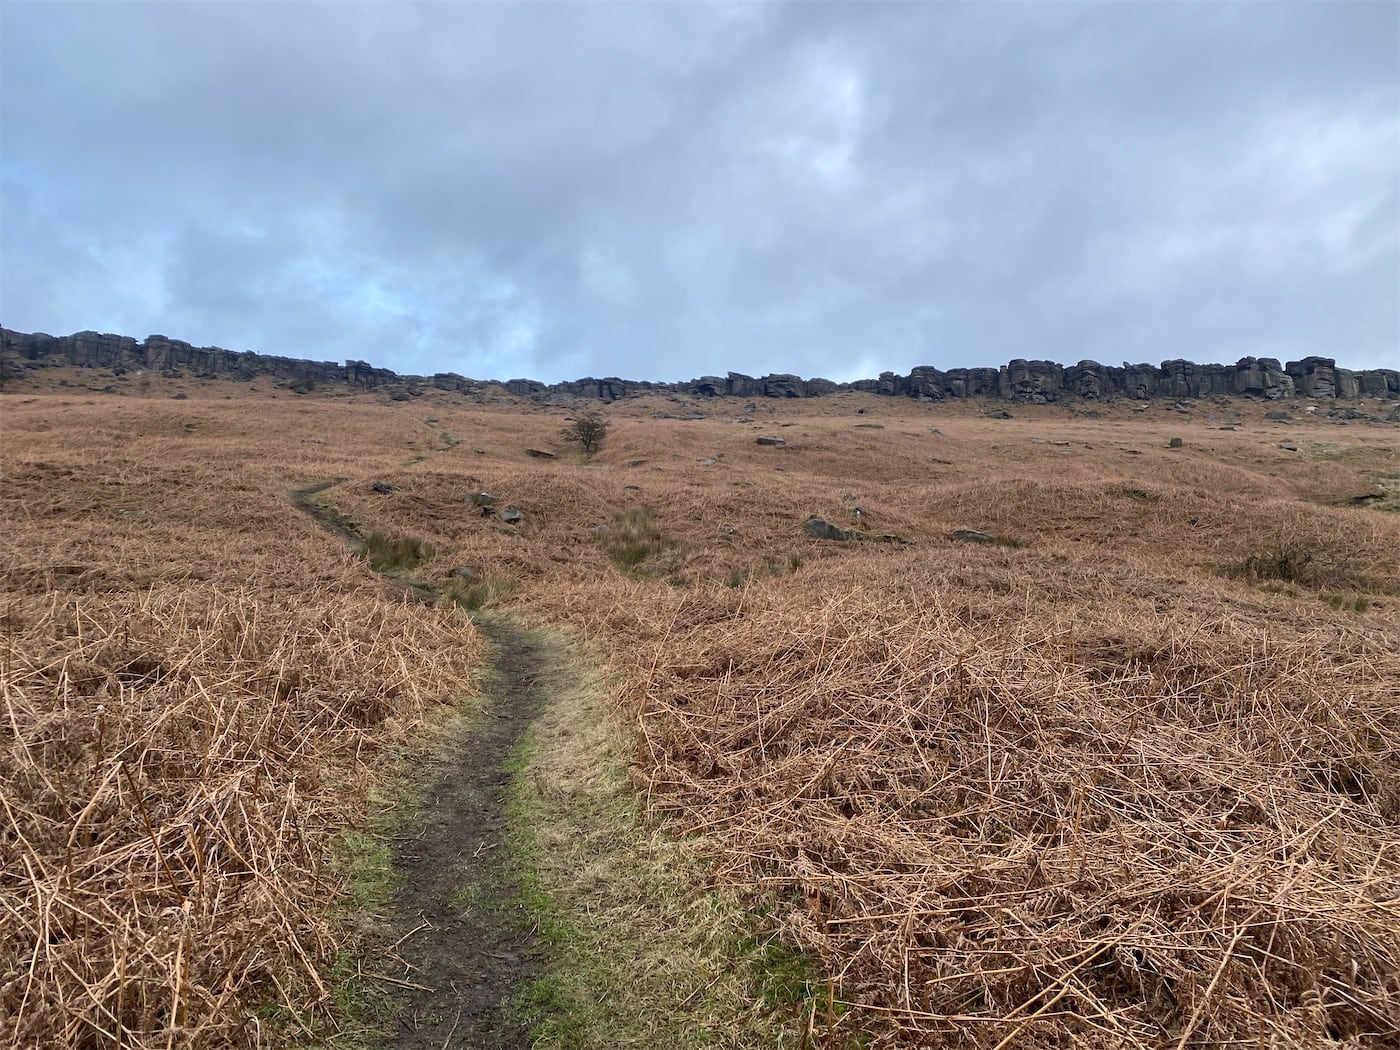 First peek of Stanage Edge, though this turned out not to be the footpath